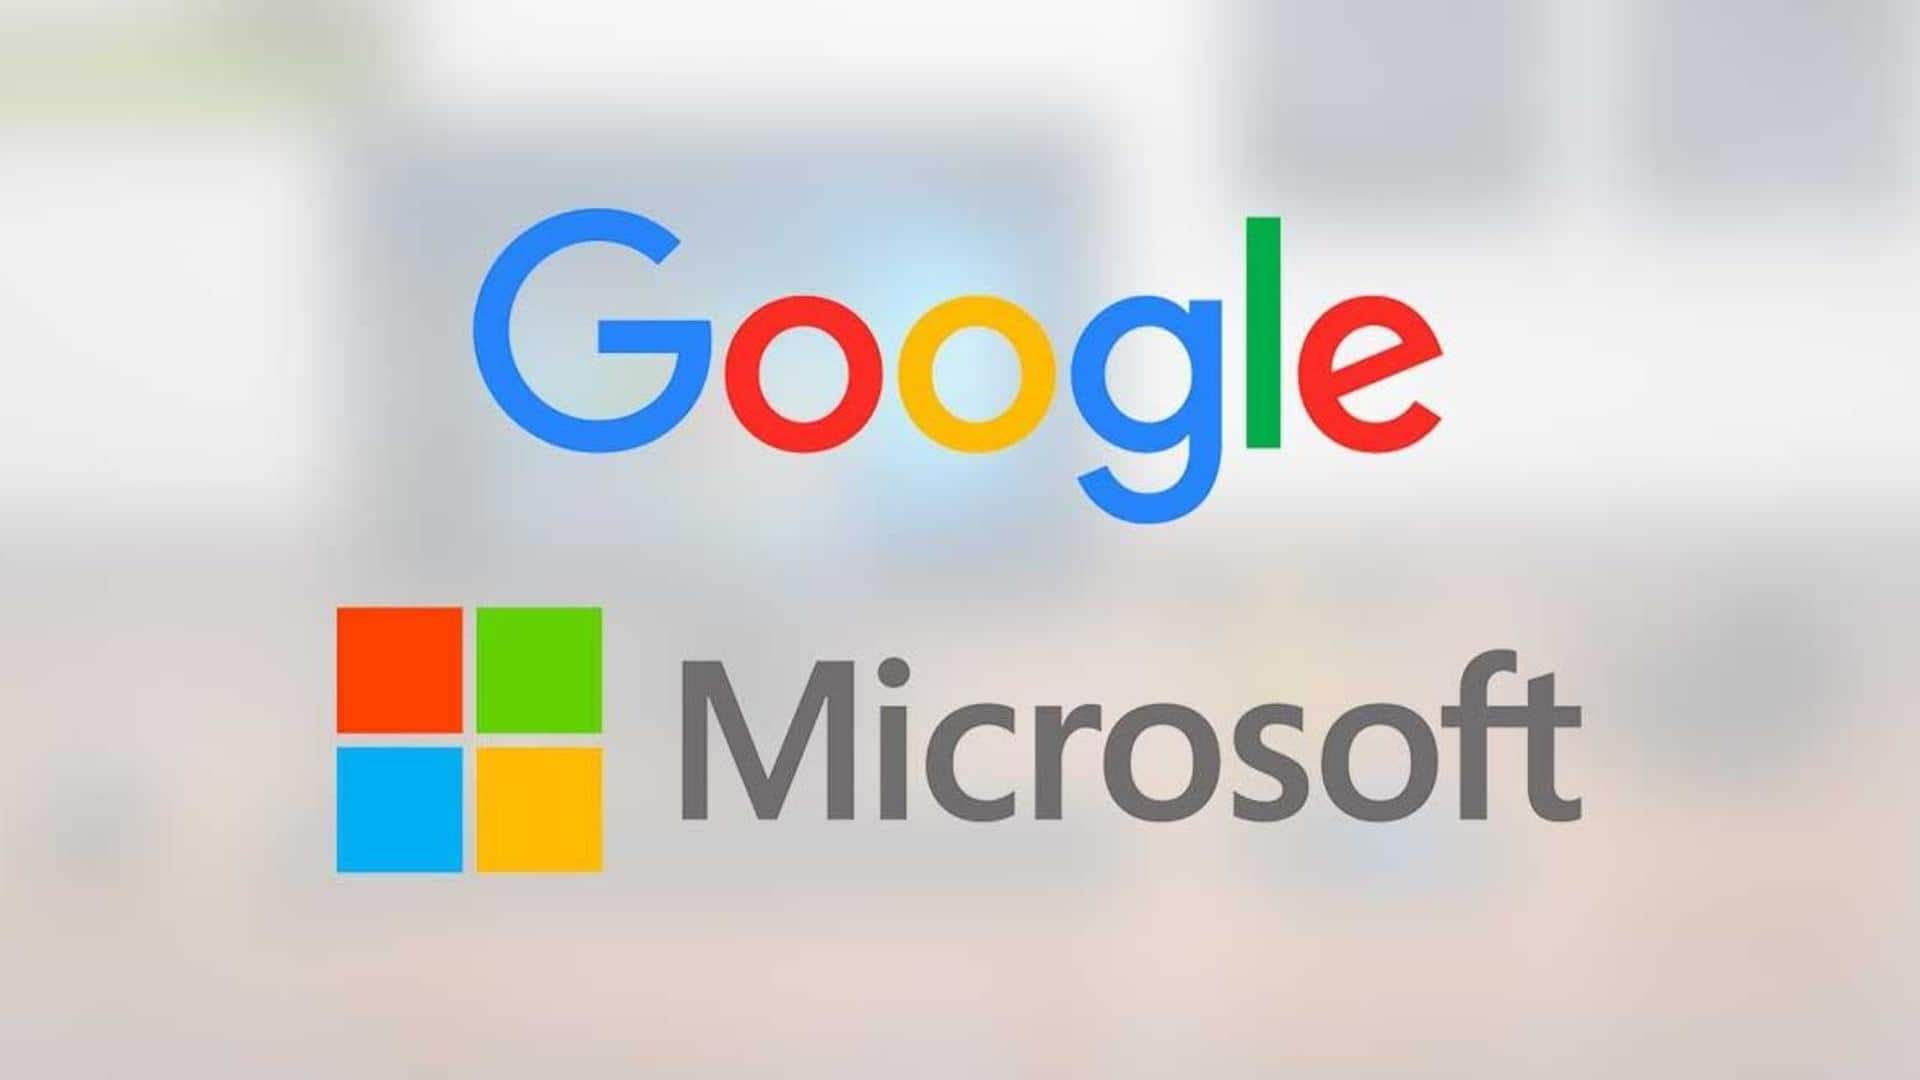 Advertisers are unhappy with Google and Microsoft: Here's why